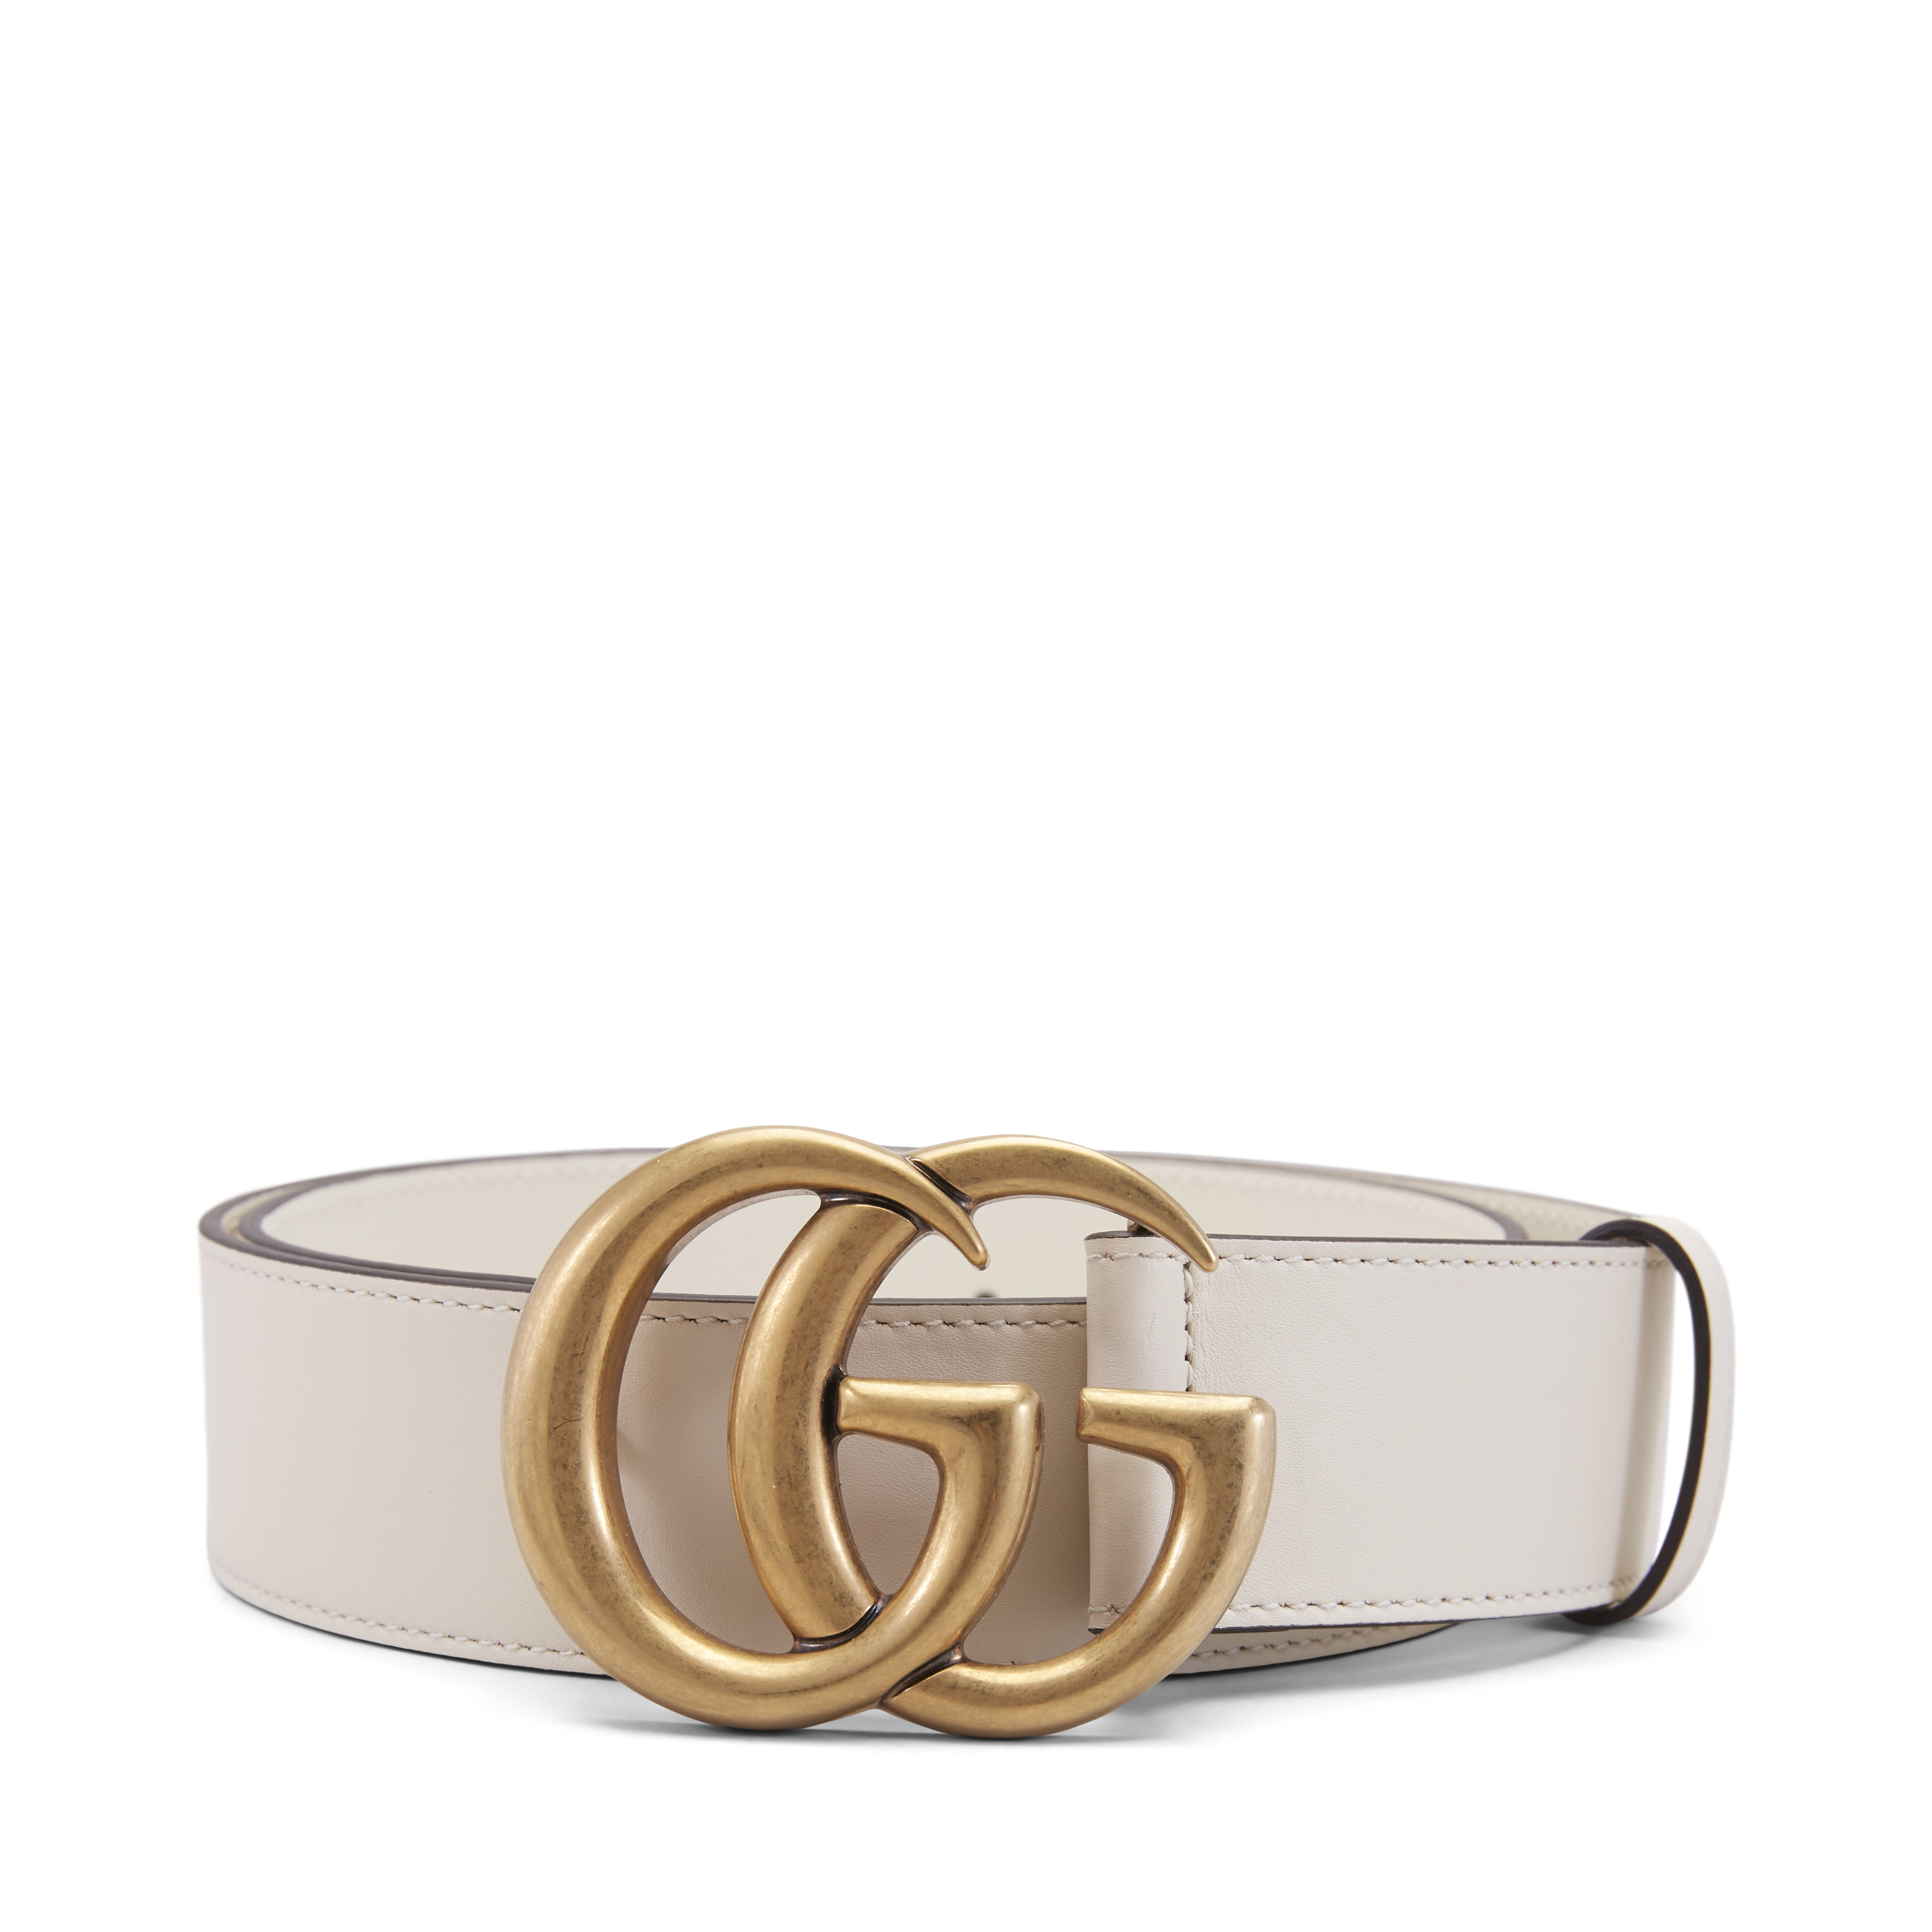 white gucci belt with gold buckle